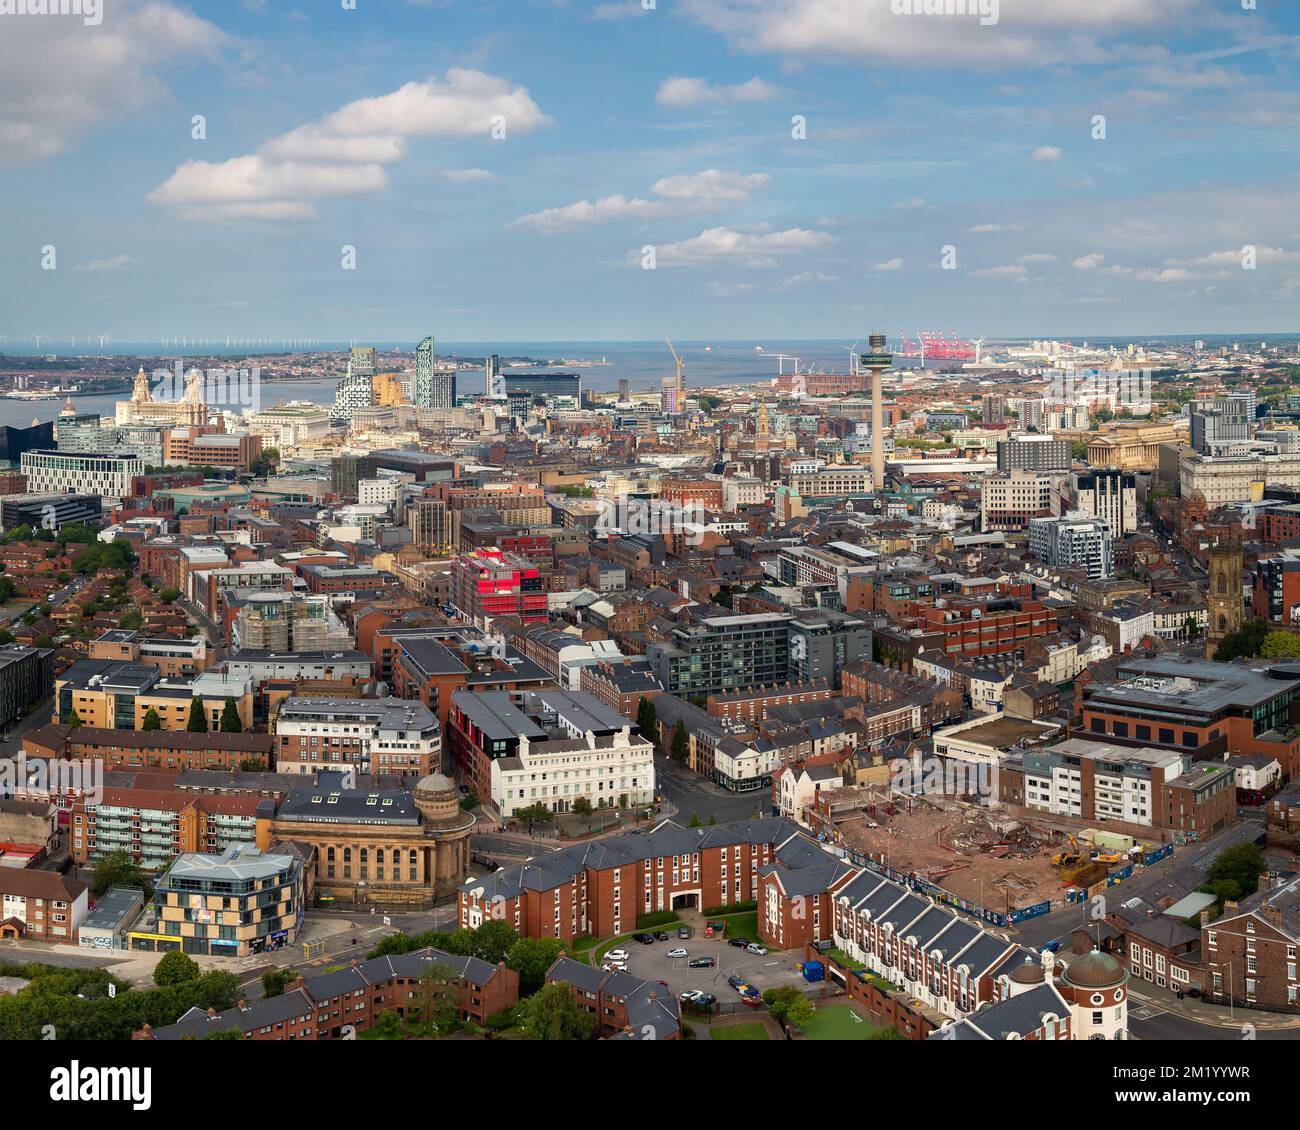 Liverpool, UK: Aerial view of City Centre, including Ropewalks, St Johns Beacon and waterfront buildings Stock Photo